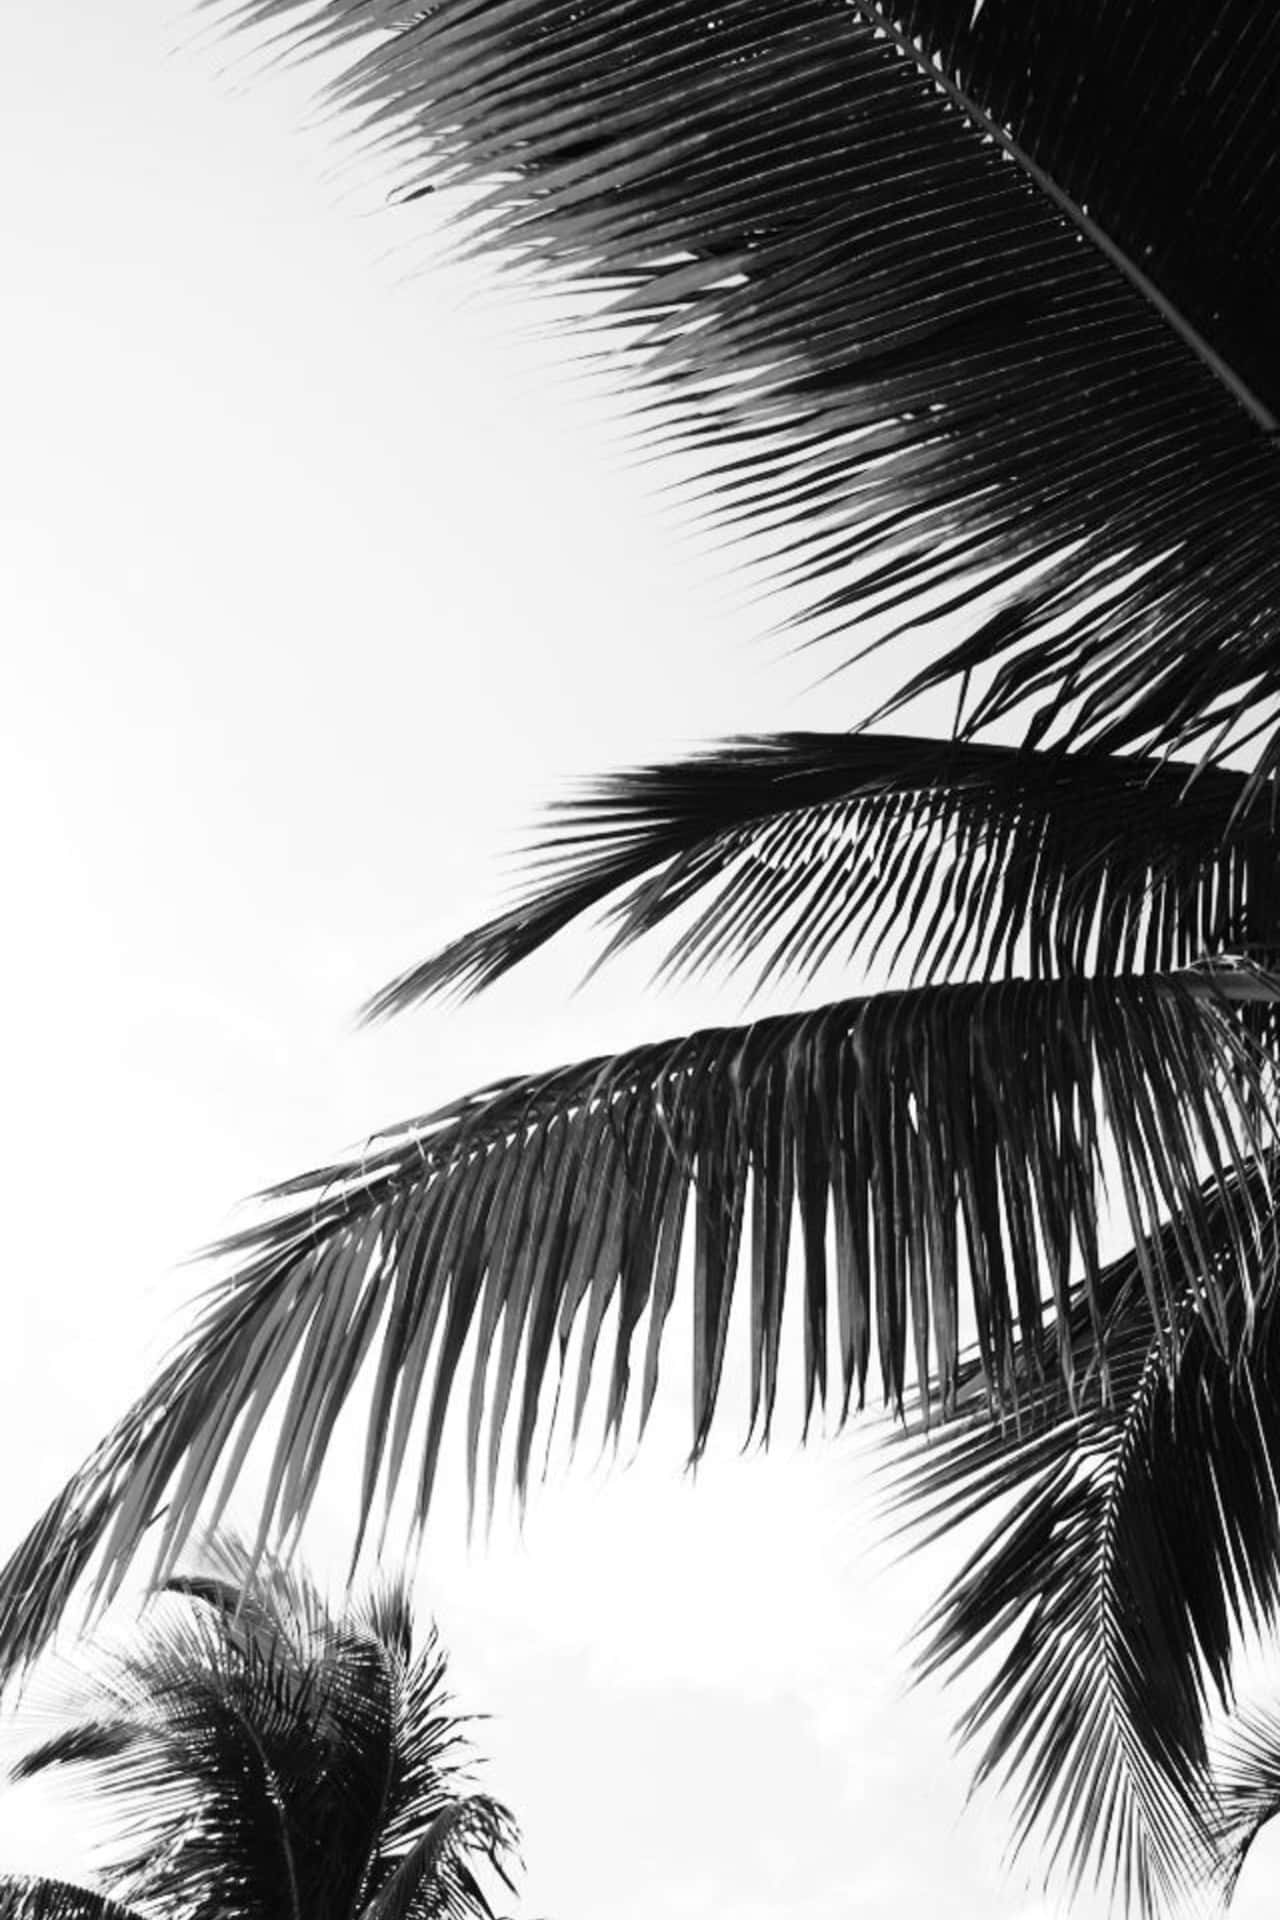 A powerful silhouette of a Palm tree in a stunning black and white photograph Wallpaper